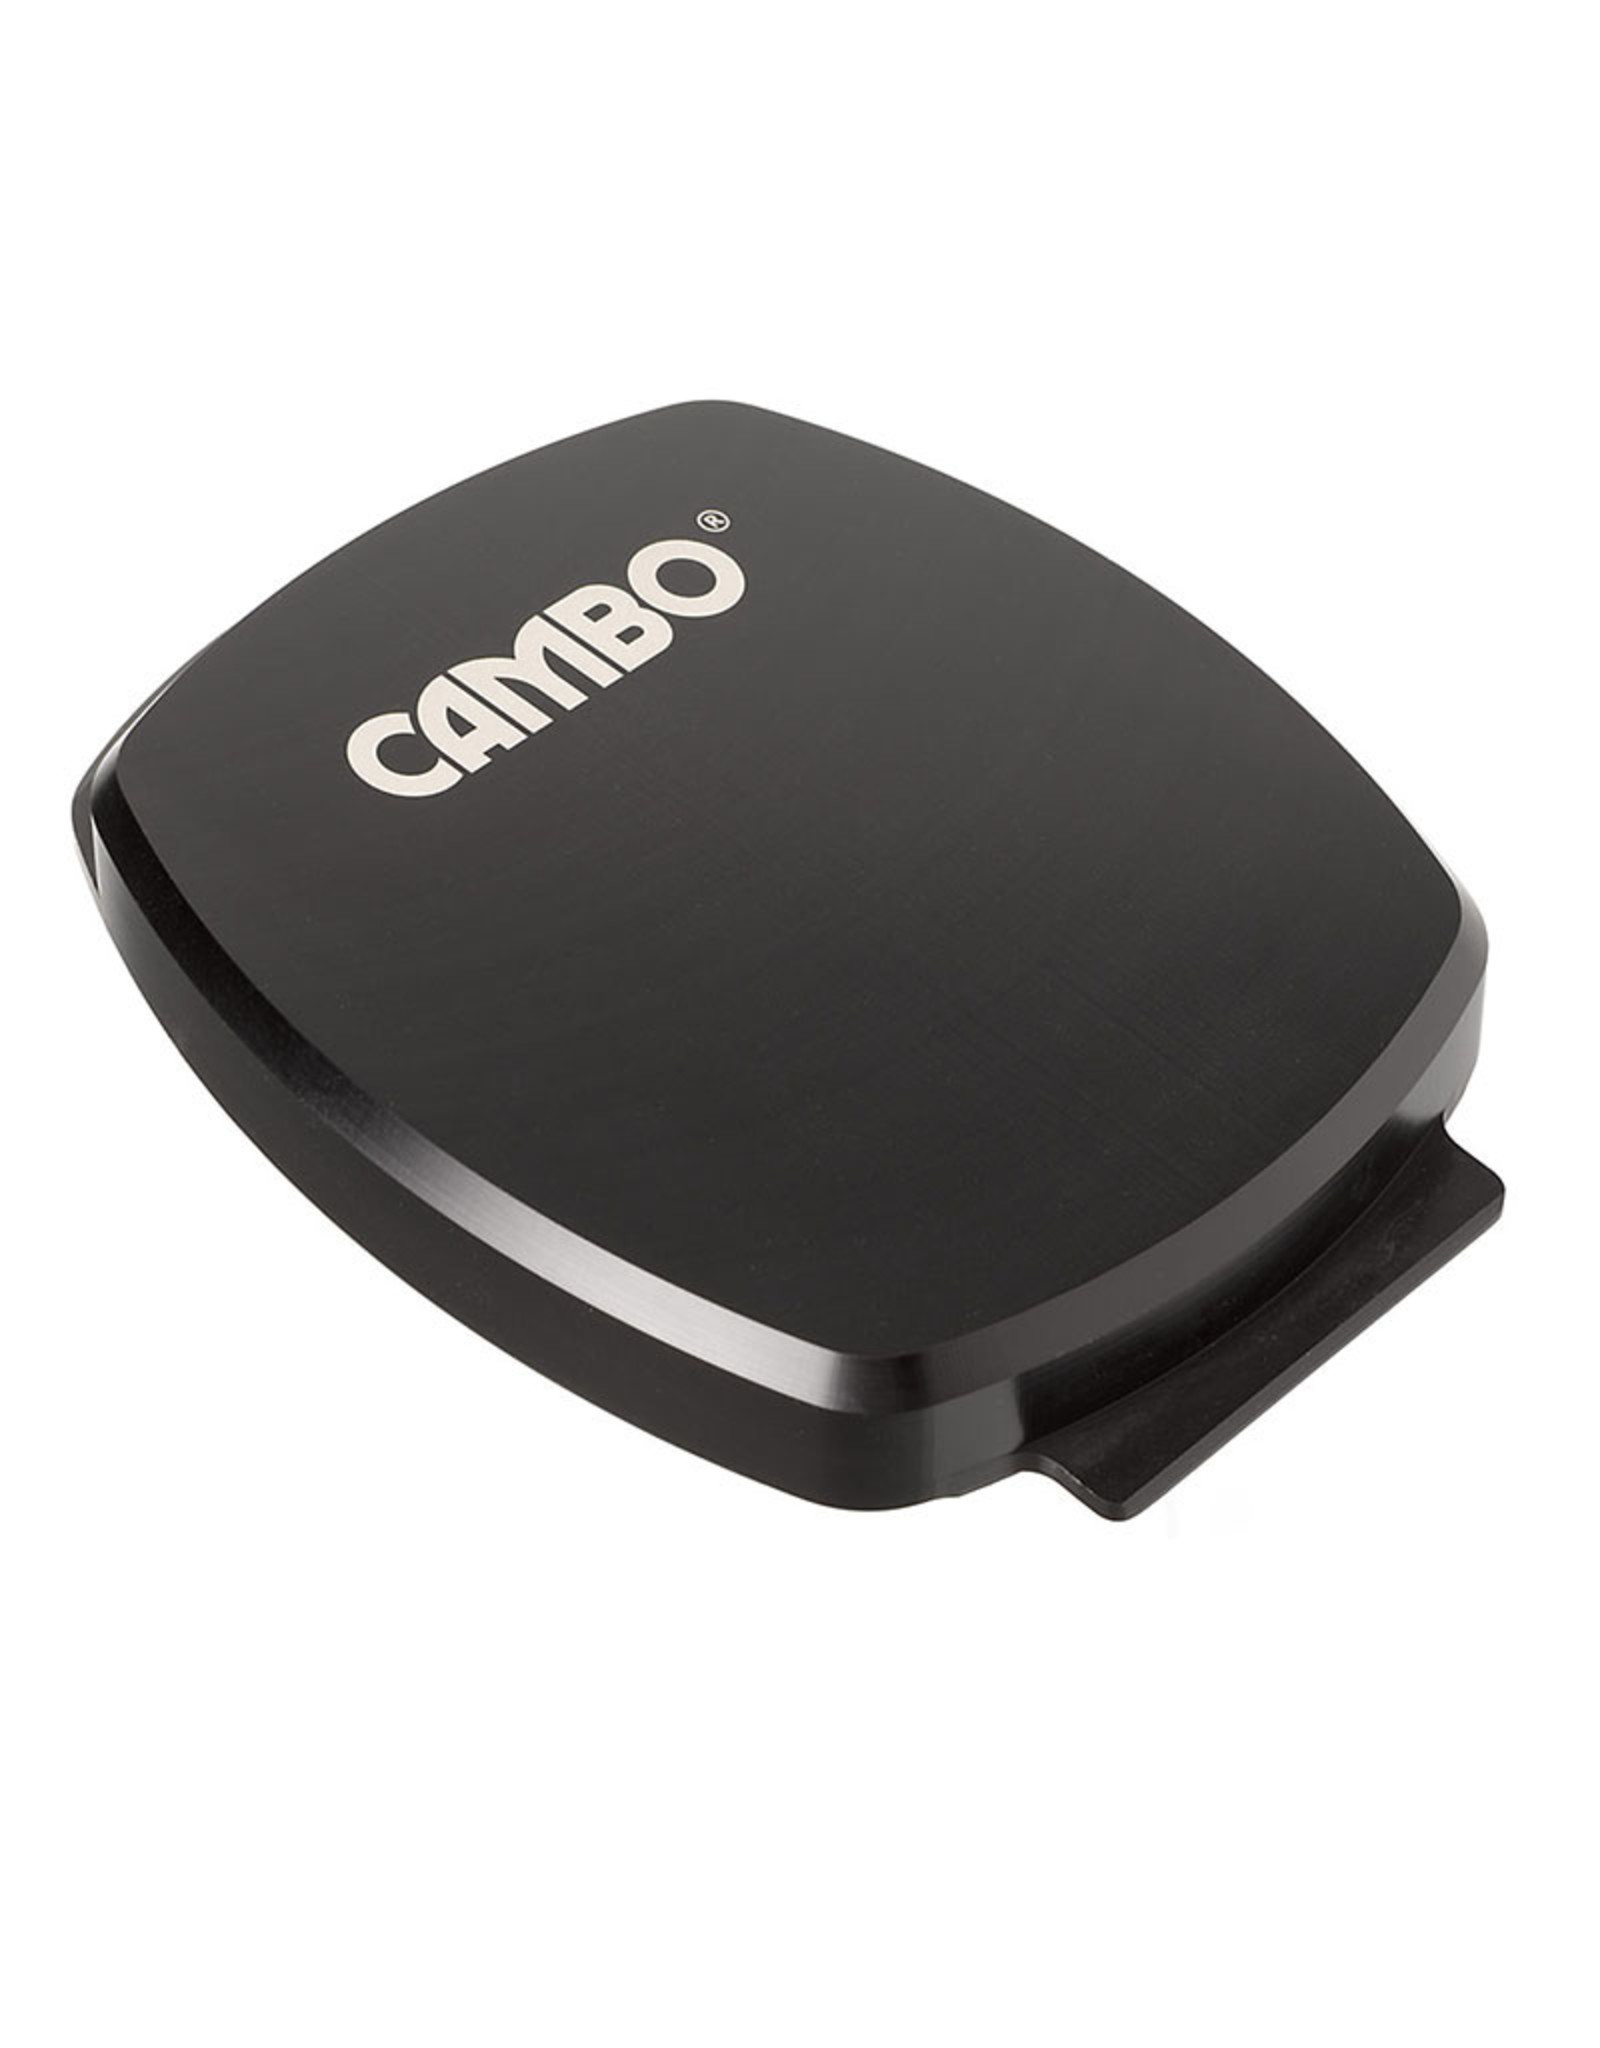 Cambo Cambo WRS-1092 Body Front Cover for Wide DS/RS (compatible with the PhaseOne XT Camera system)